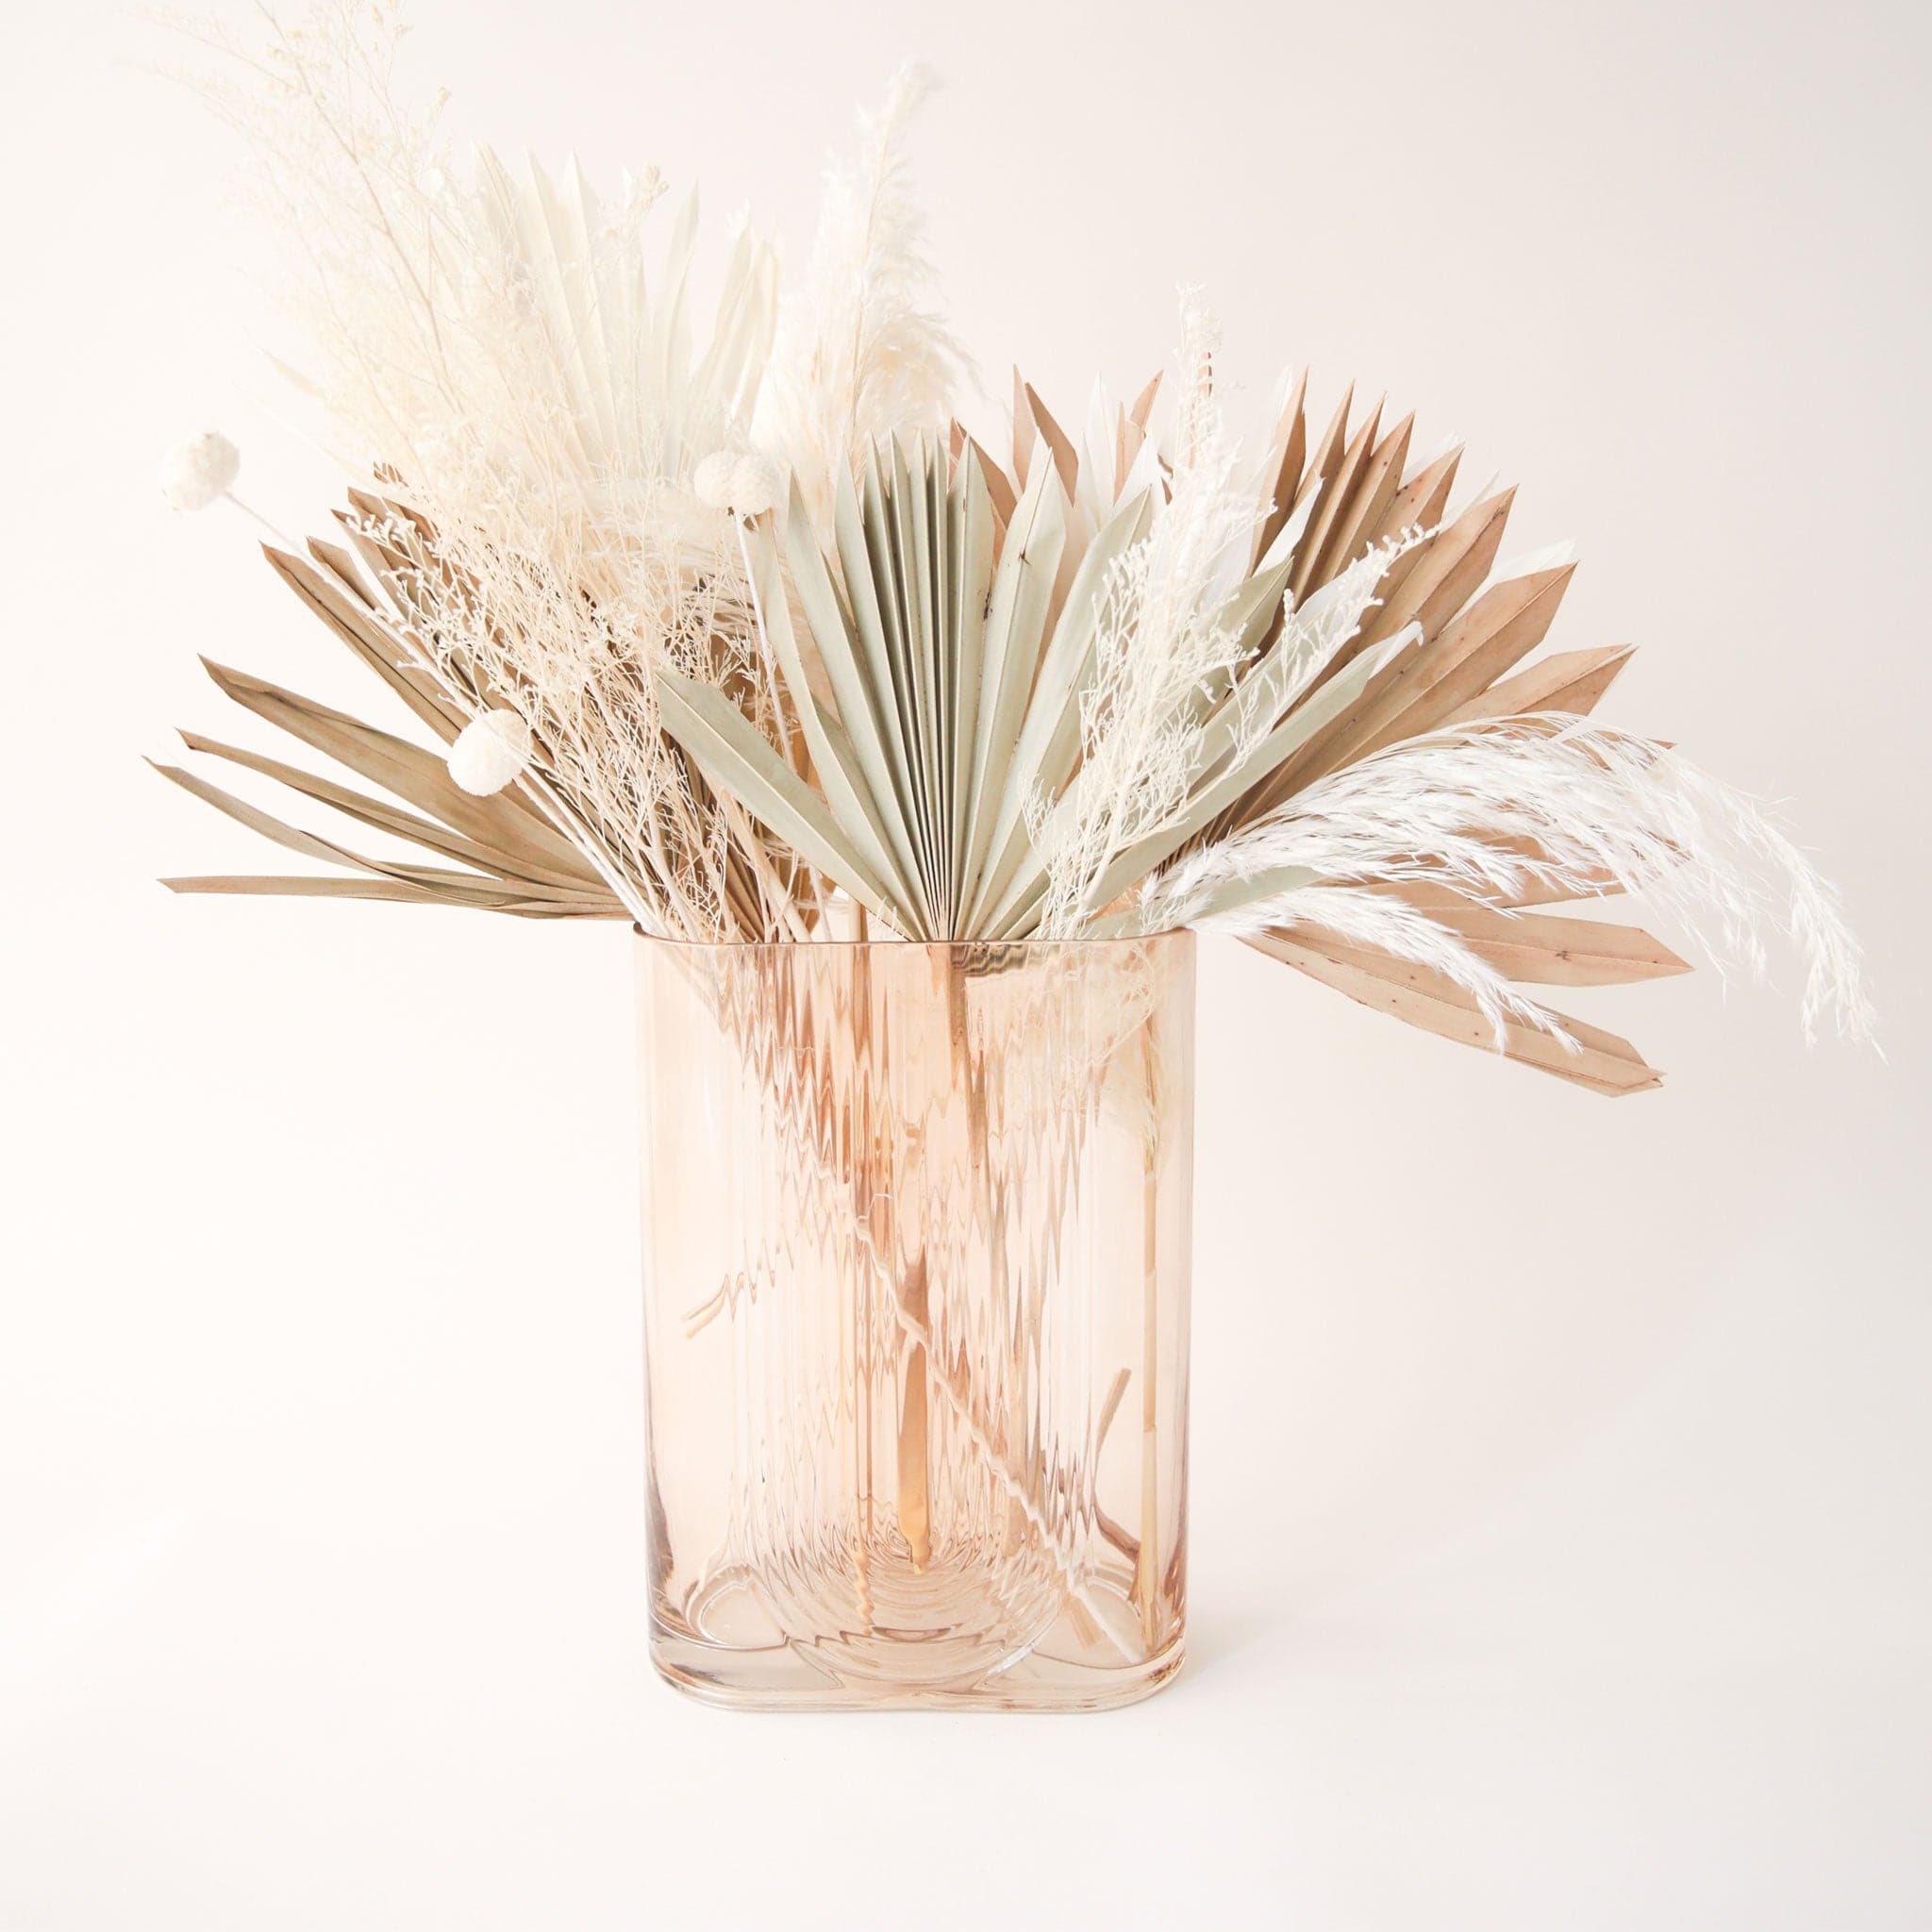 An oval shaped glass vase in a tan shade and an upside down rainbow etching on the front and back filled with dried florals and palm leaves.